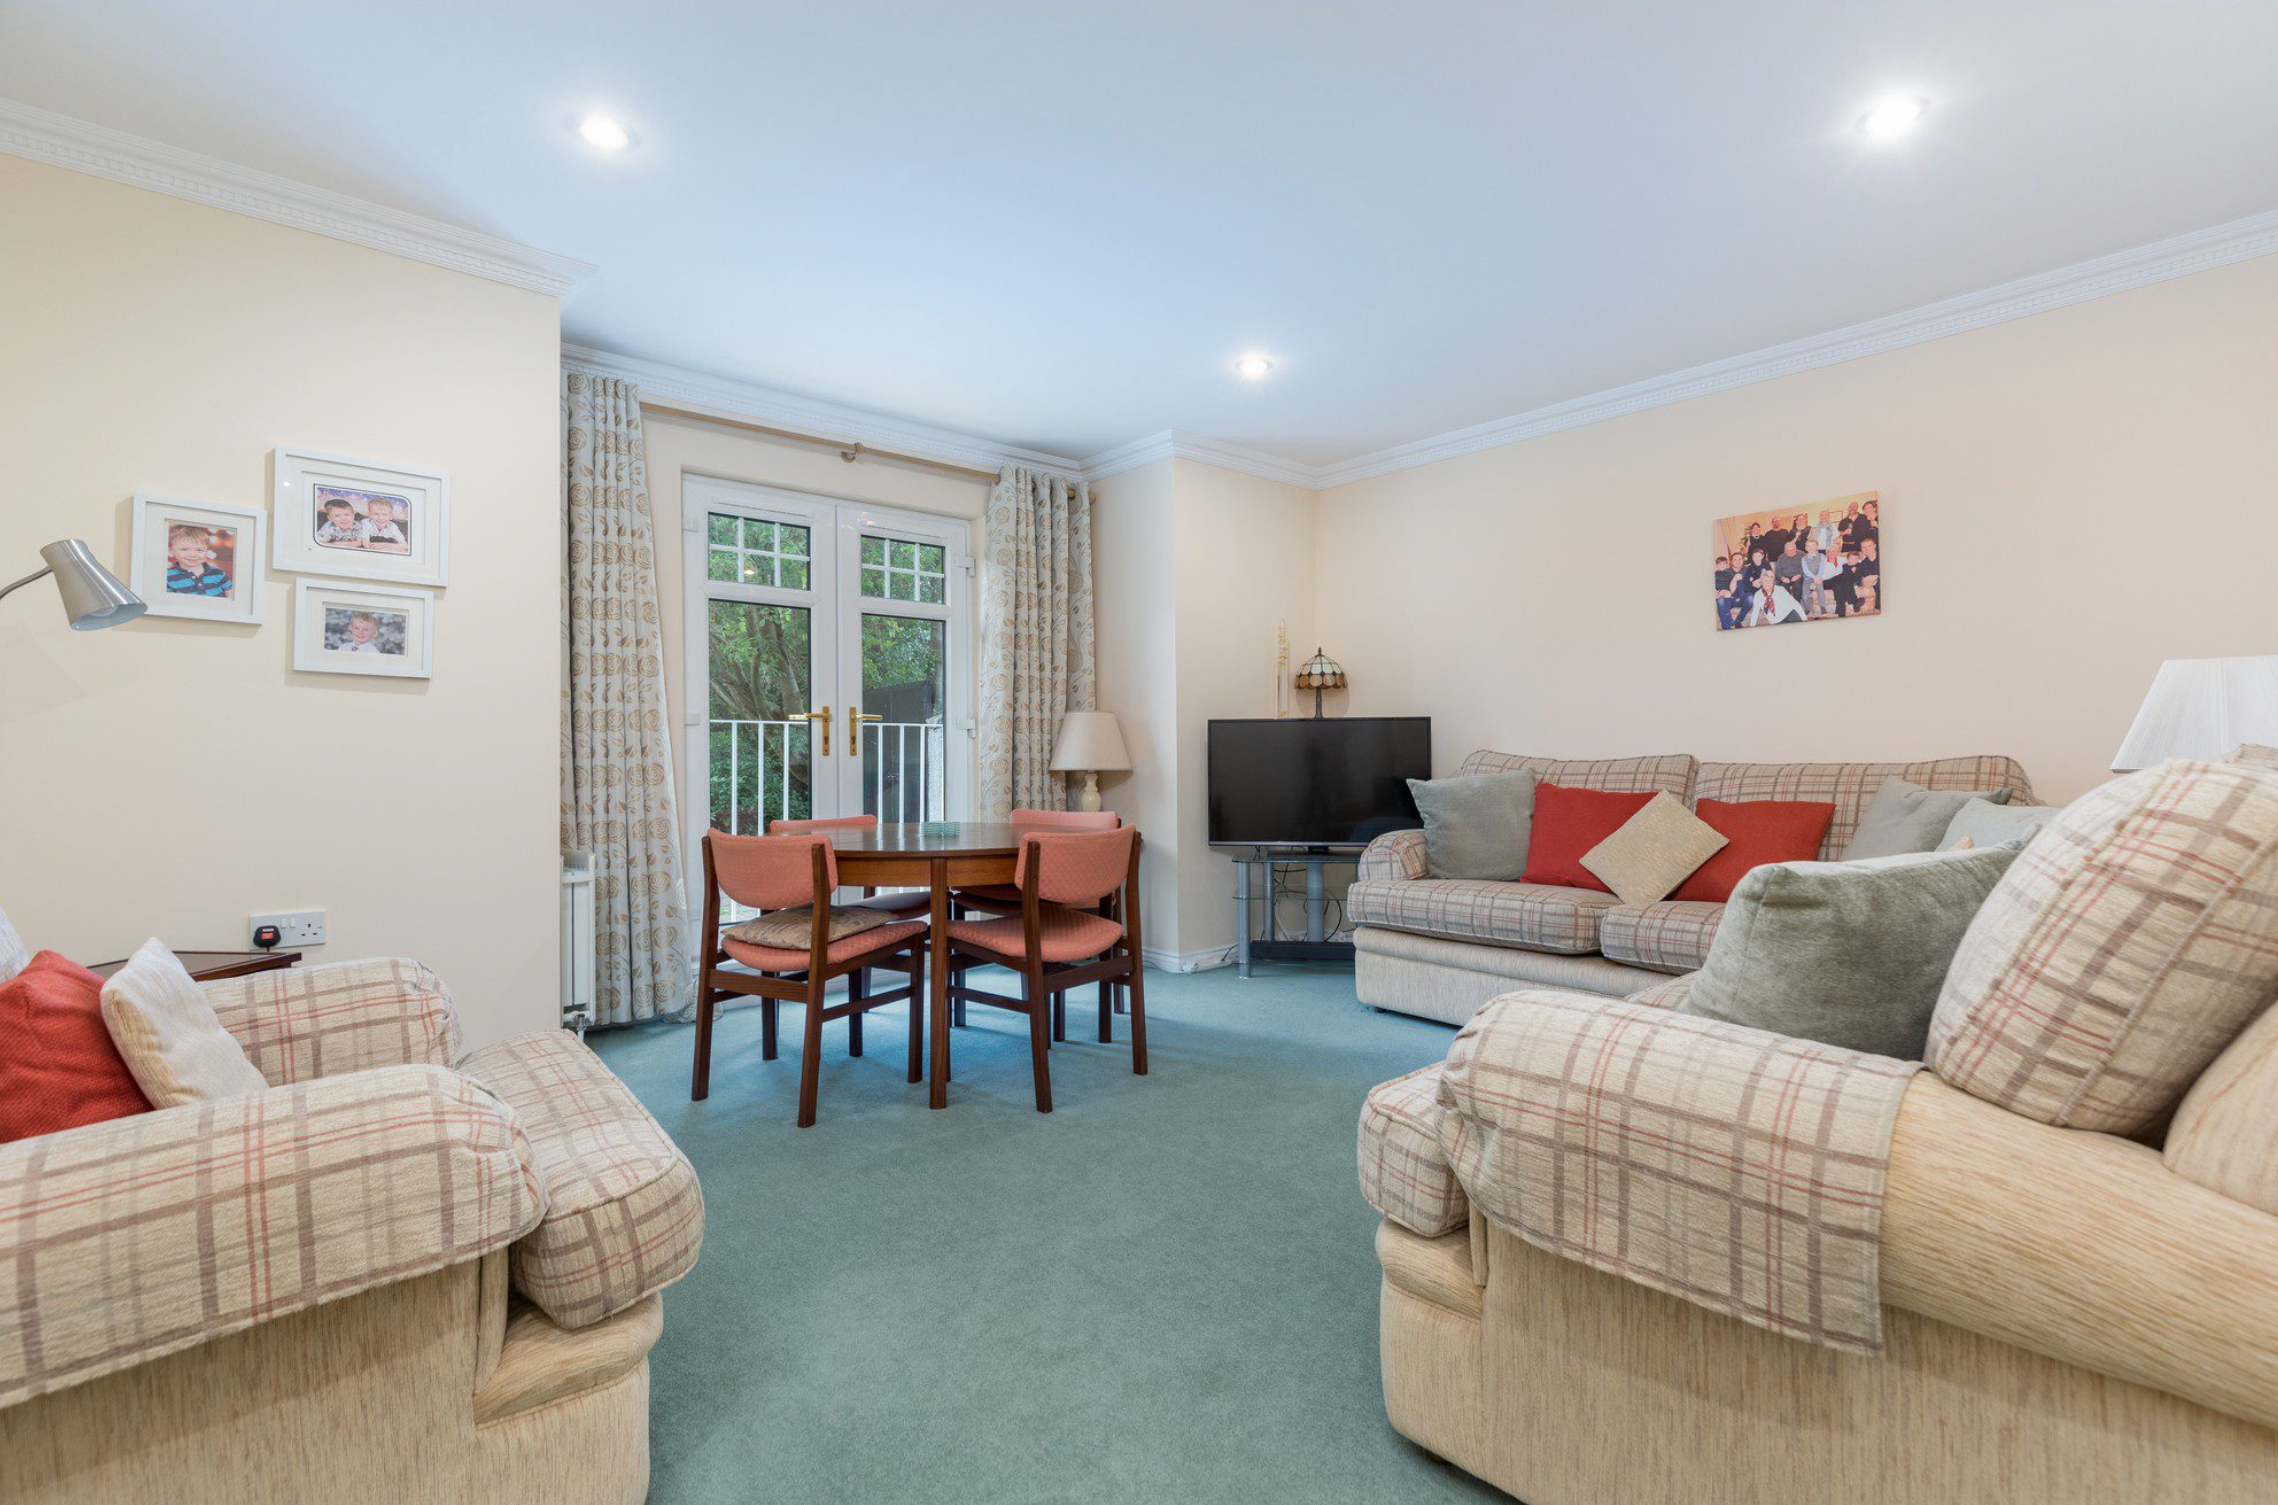 Two bedroom ground floor retirement flat - perfect for downsizing